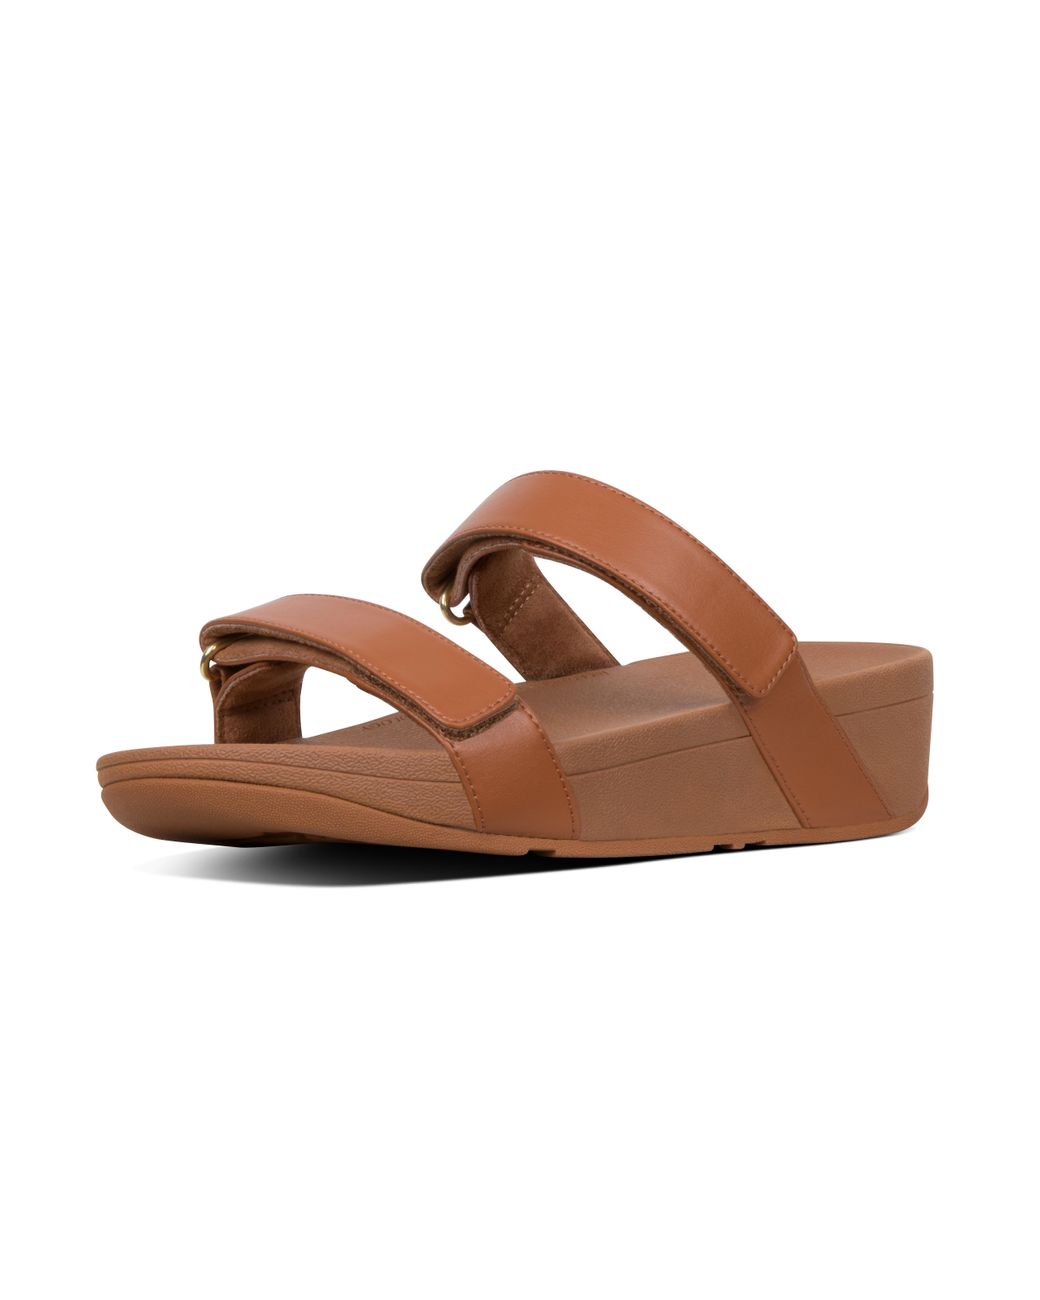 fitflop wedge